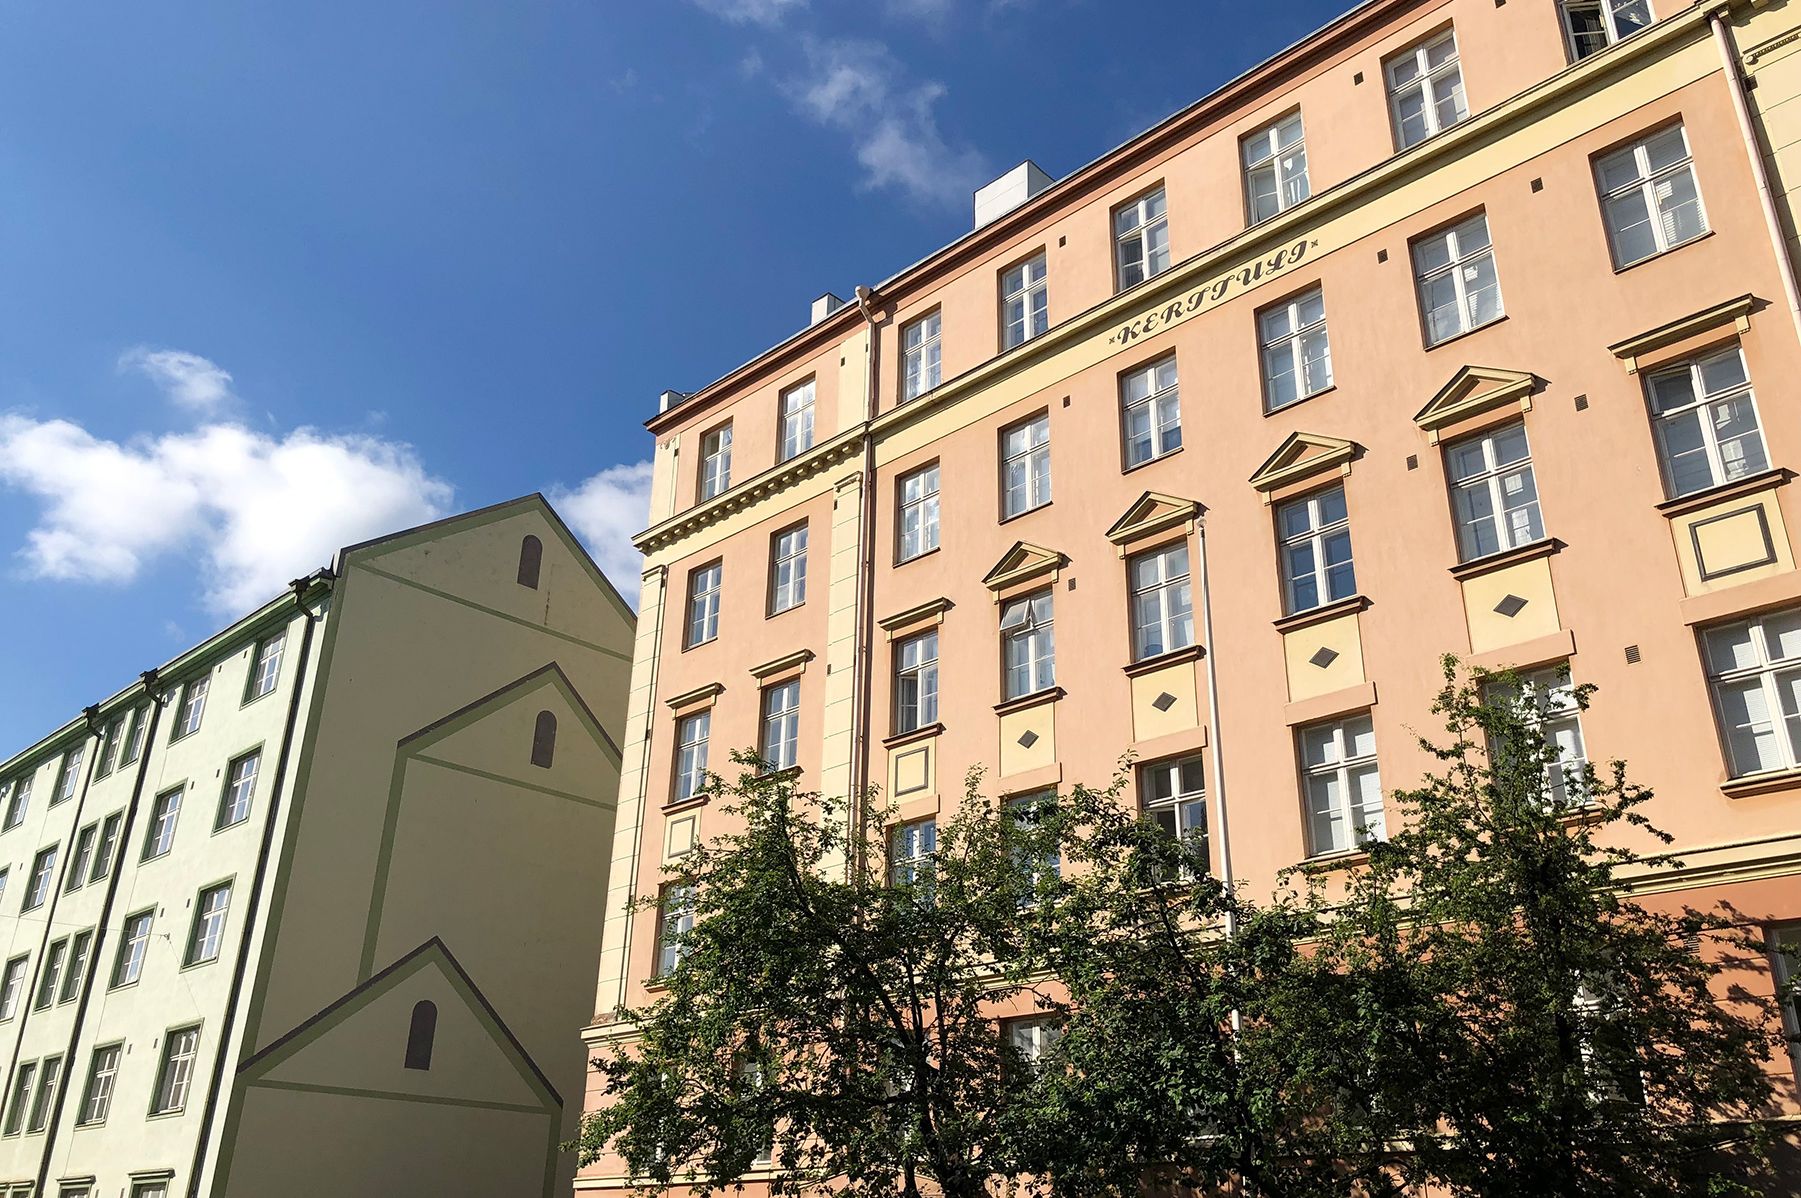 The neoclassical, multi-storey, green and peach-coloured buildings on Sirkkalankatu Street in the sunshine.